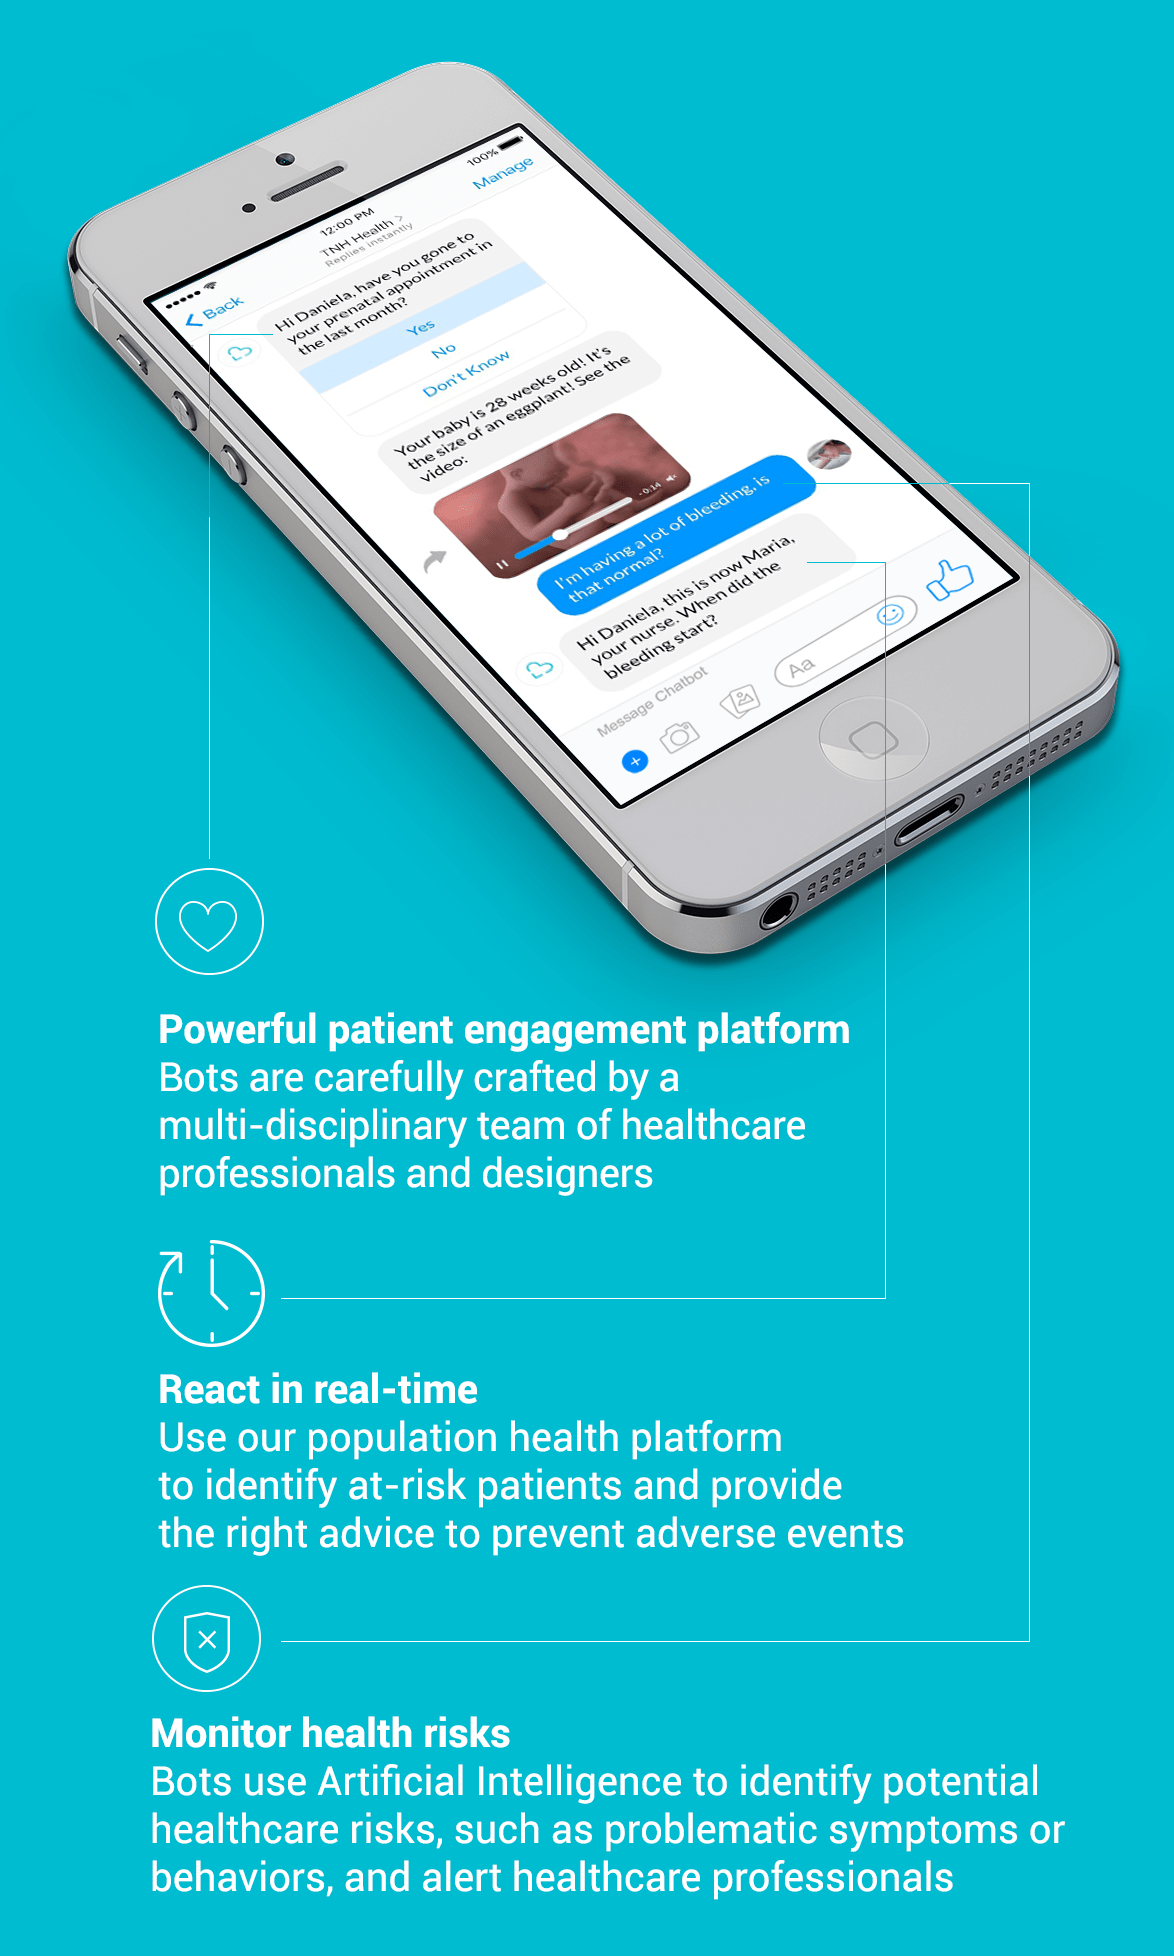 A smartphone shows how it should look like a conversation with a chatbot. Next to the images are features of the product: react in real-time; patient engagement platform and monitor health risks.